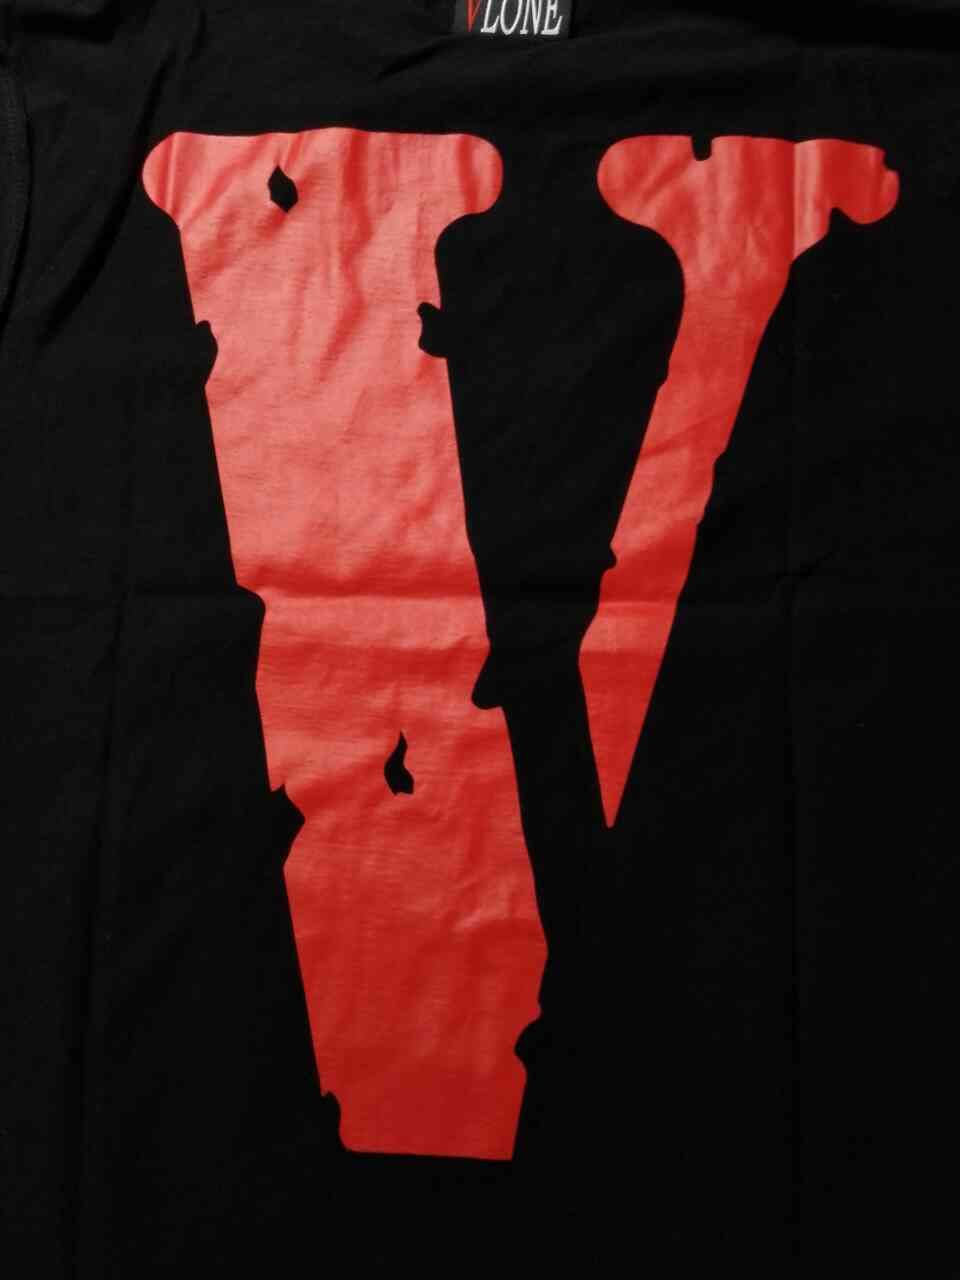 Vlone Wallpaper Free Vlone Background - Wallpaper, Background picture, Homescreen